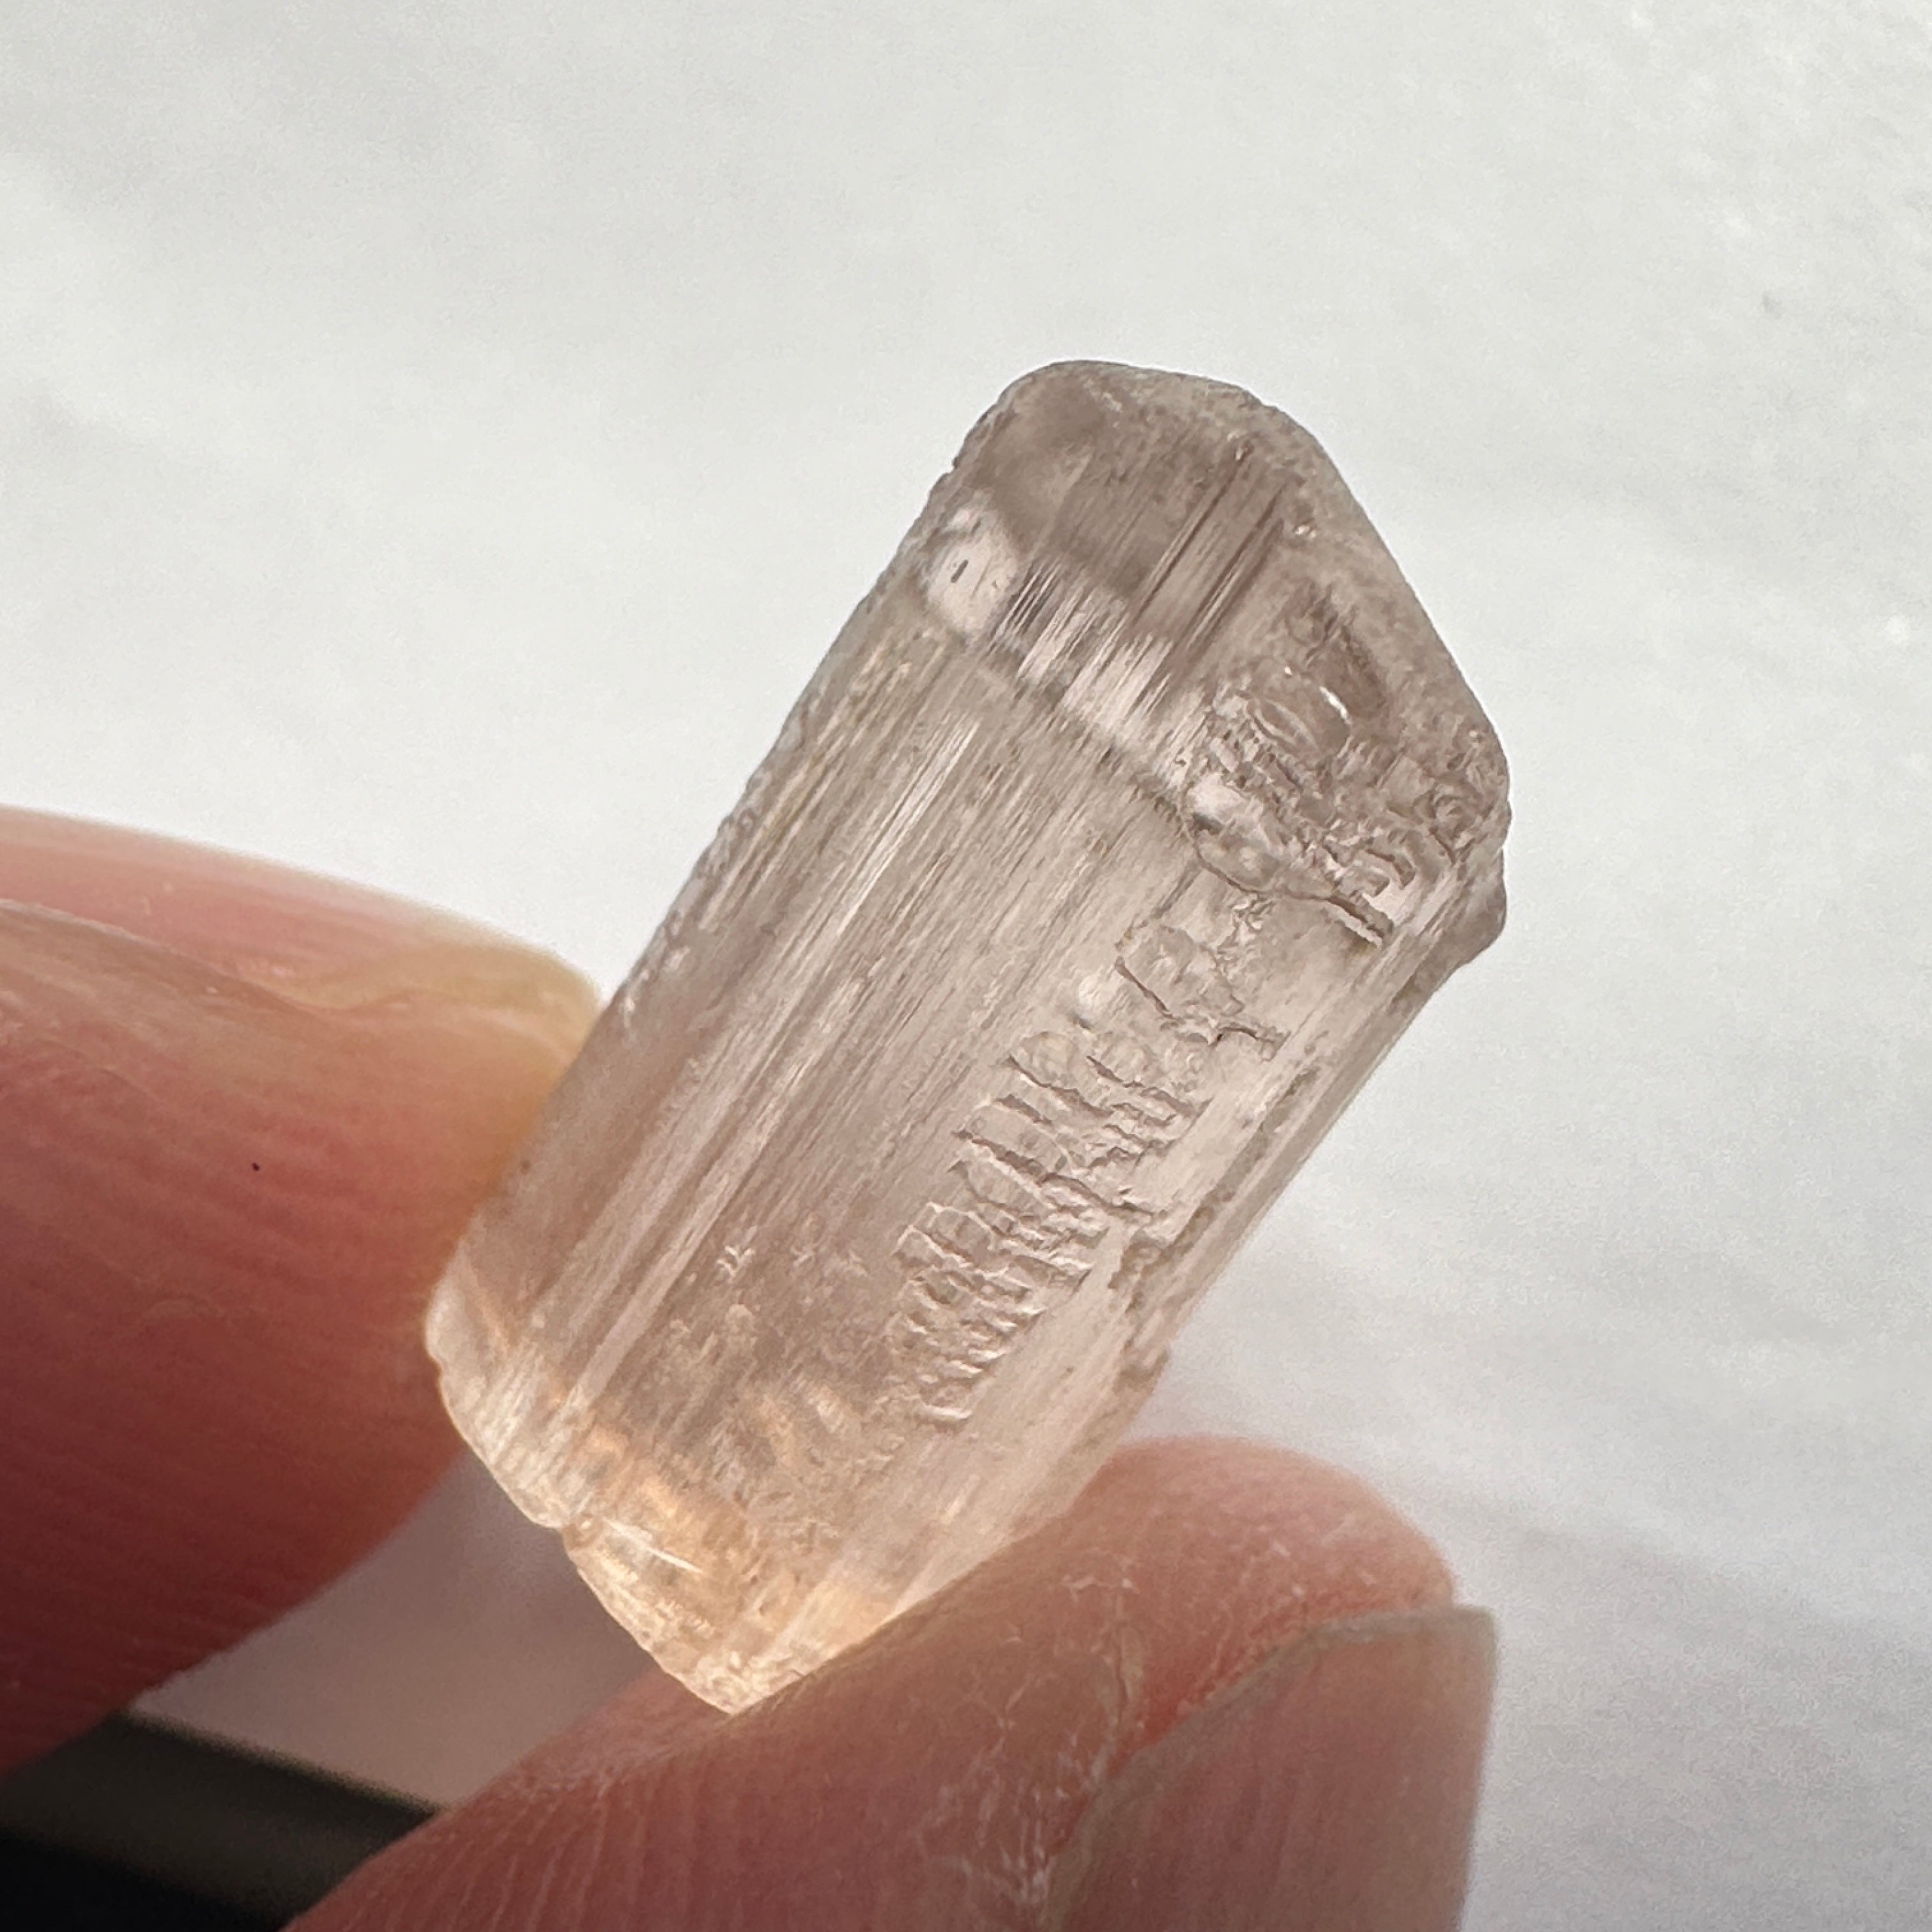 10.51ct Very Rare, Peach Pink Scapolite, Tanzania, Untreated Unheated, VVS-IF (flawless)